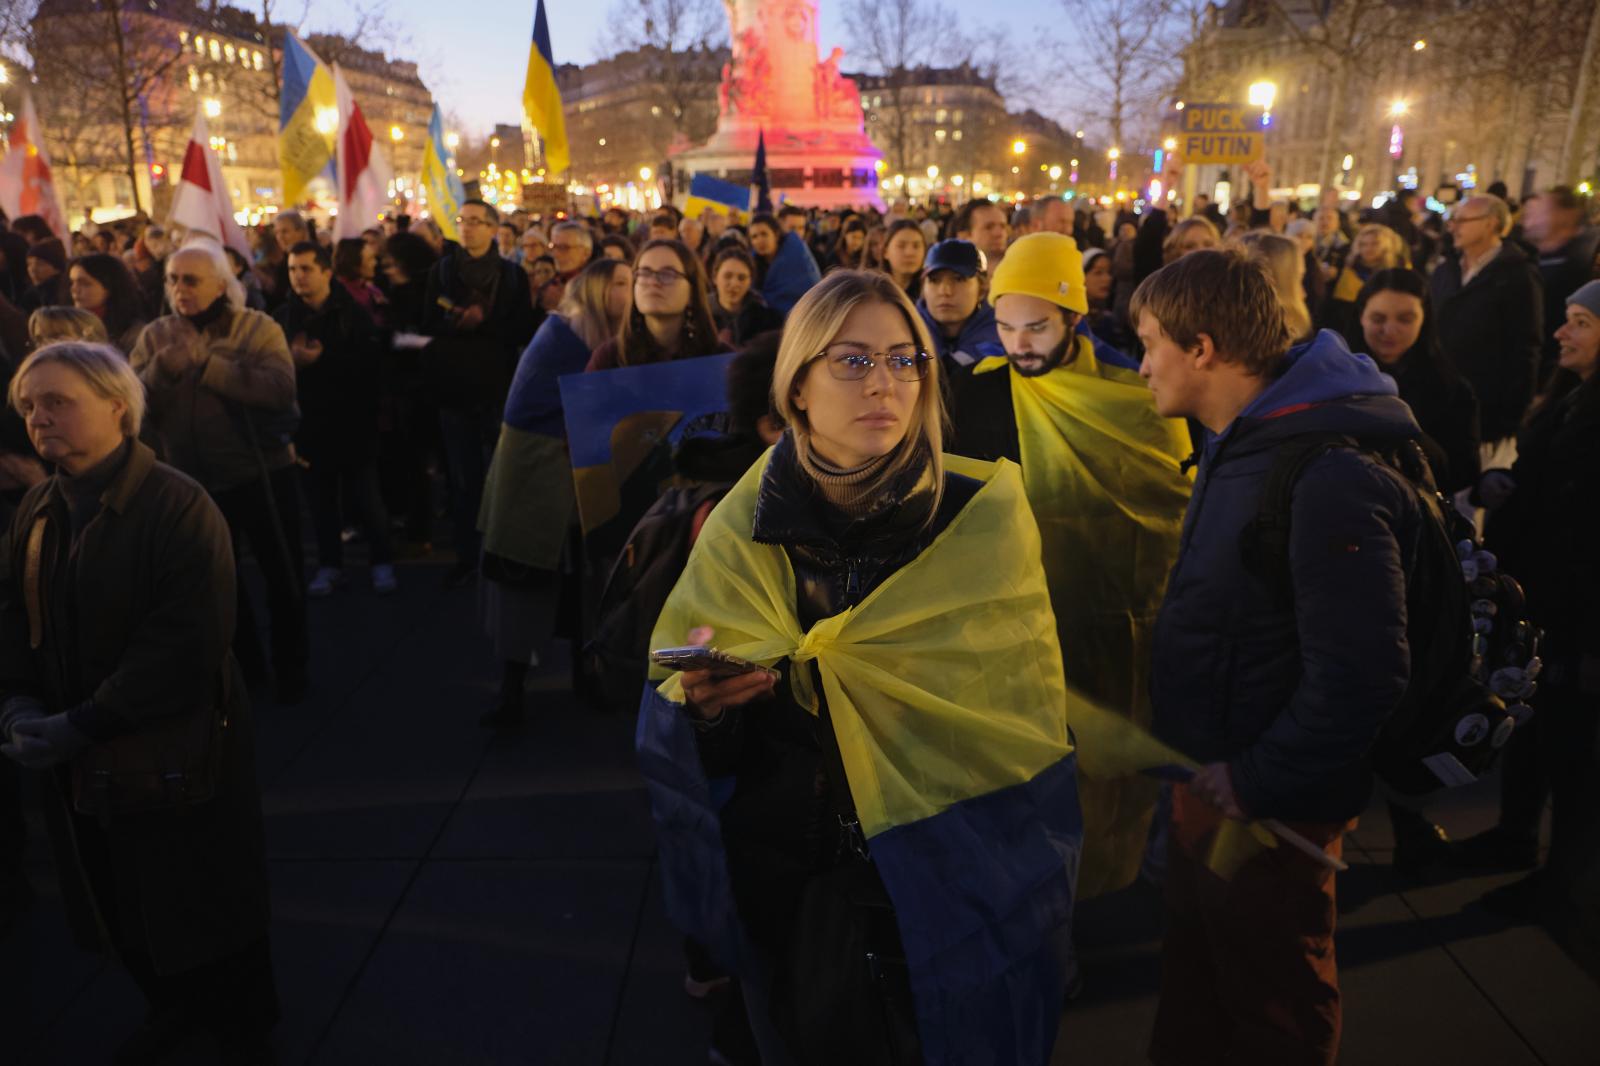 Evening gathering in Paris in support of the Ukraine | Buy this image